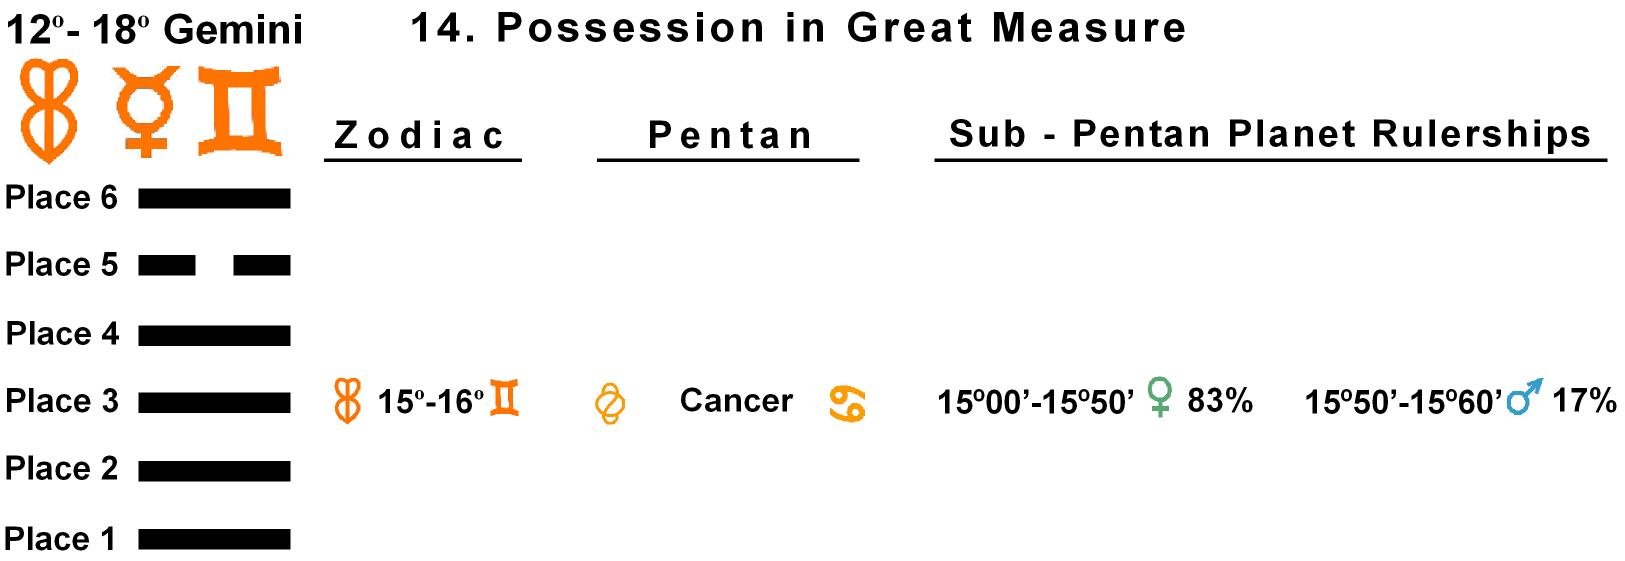 Pent-lines-03GE 15-16 Hx-14 Possession In Great Measure